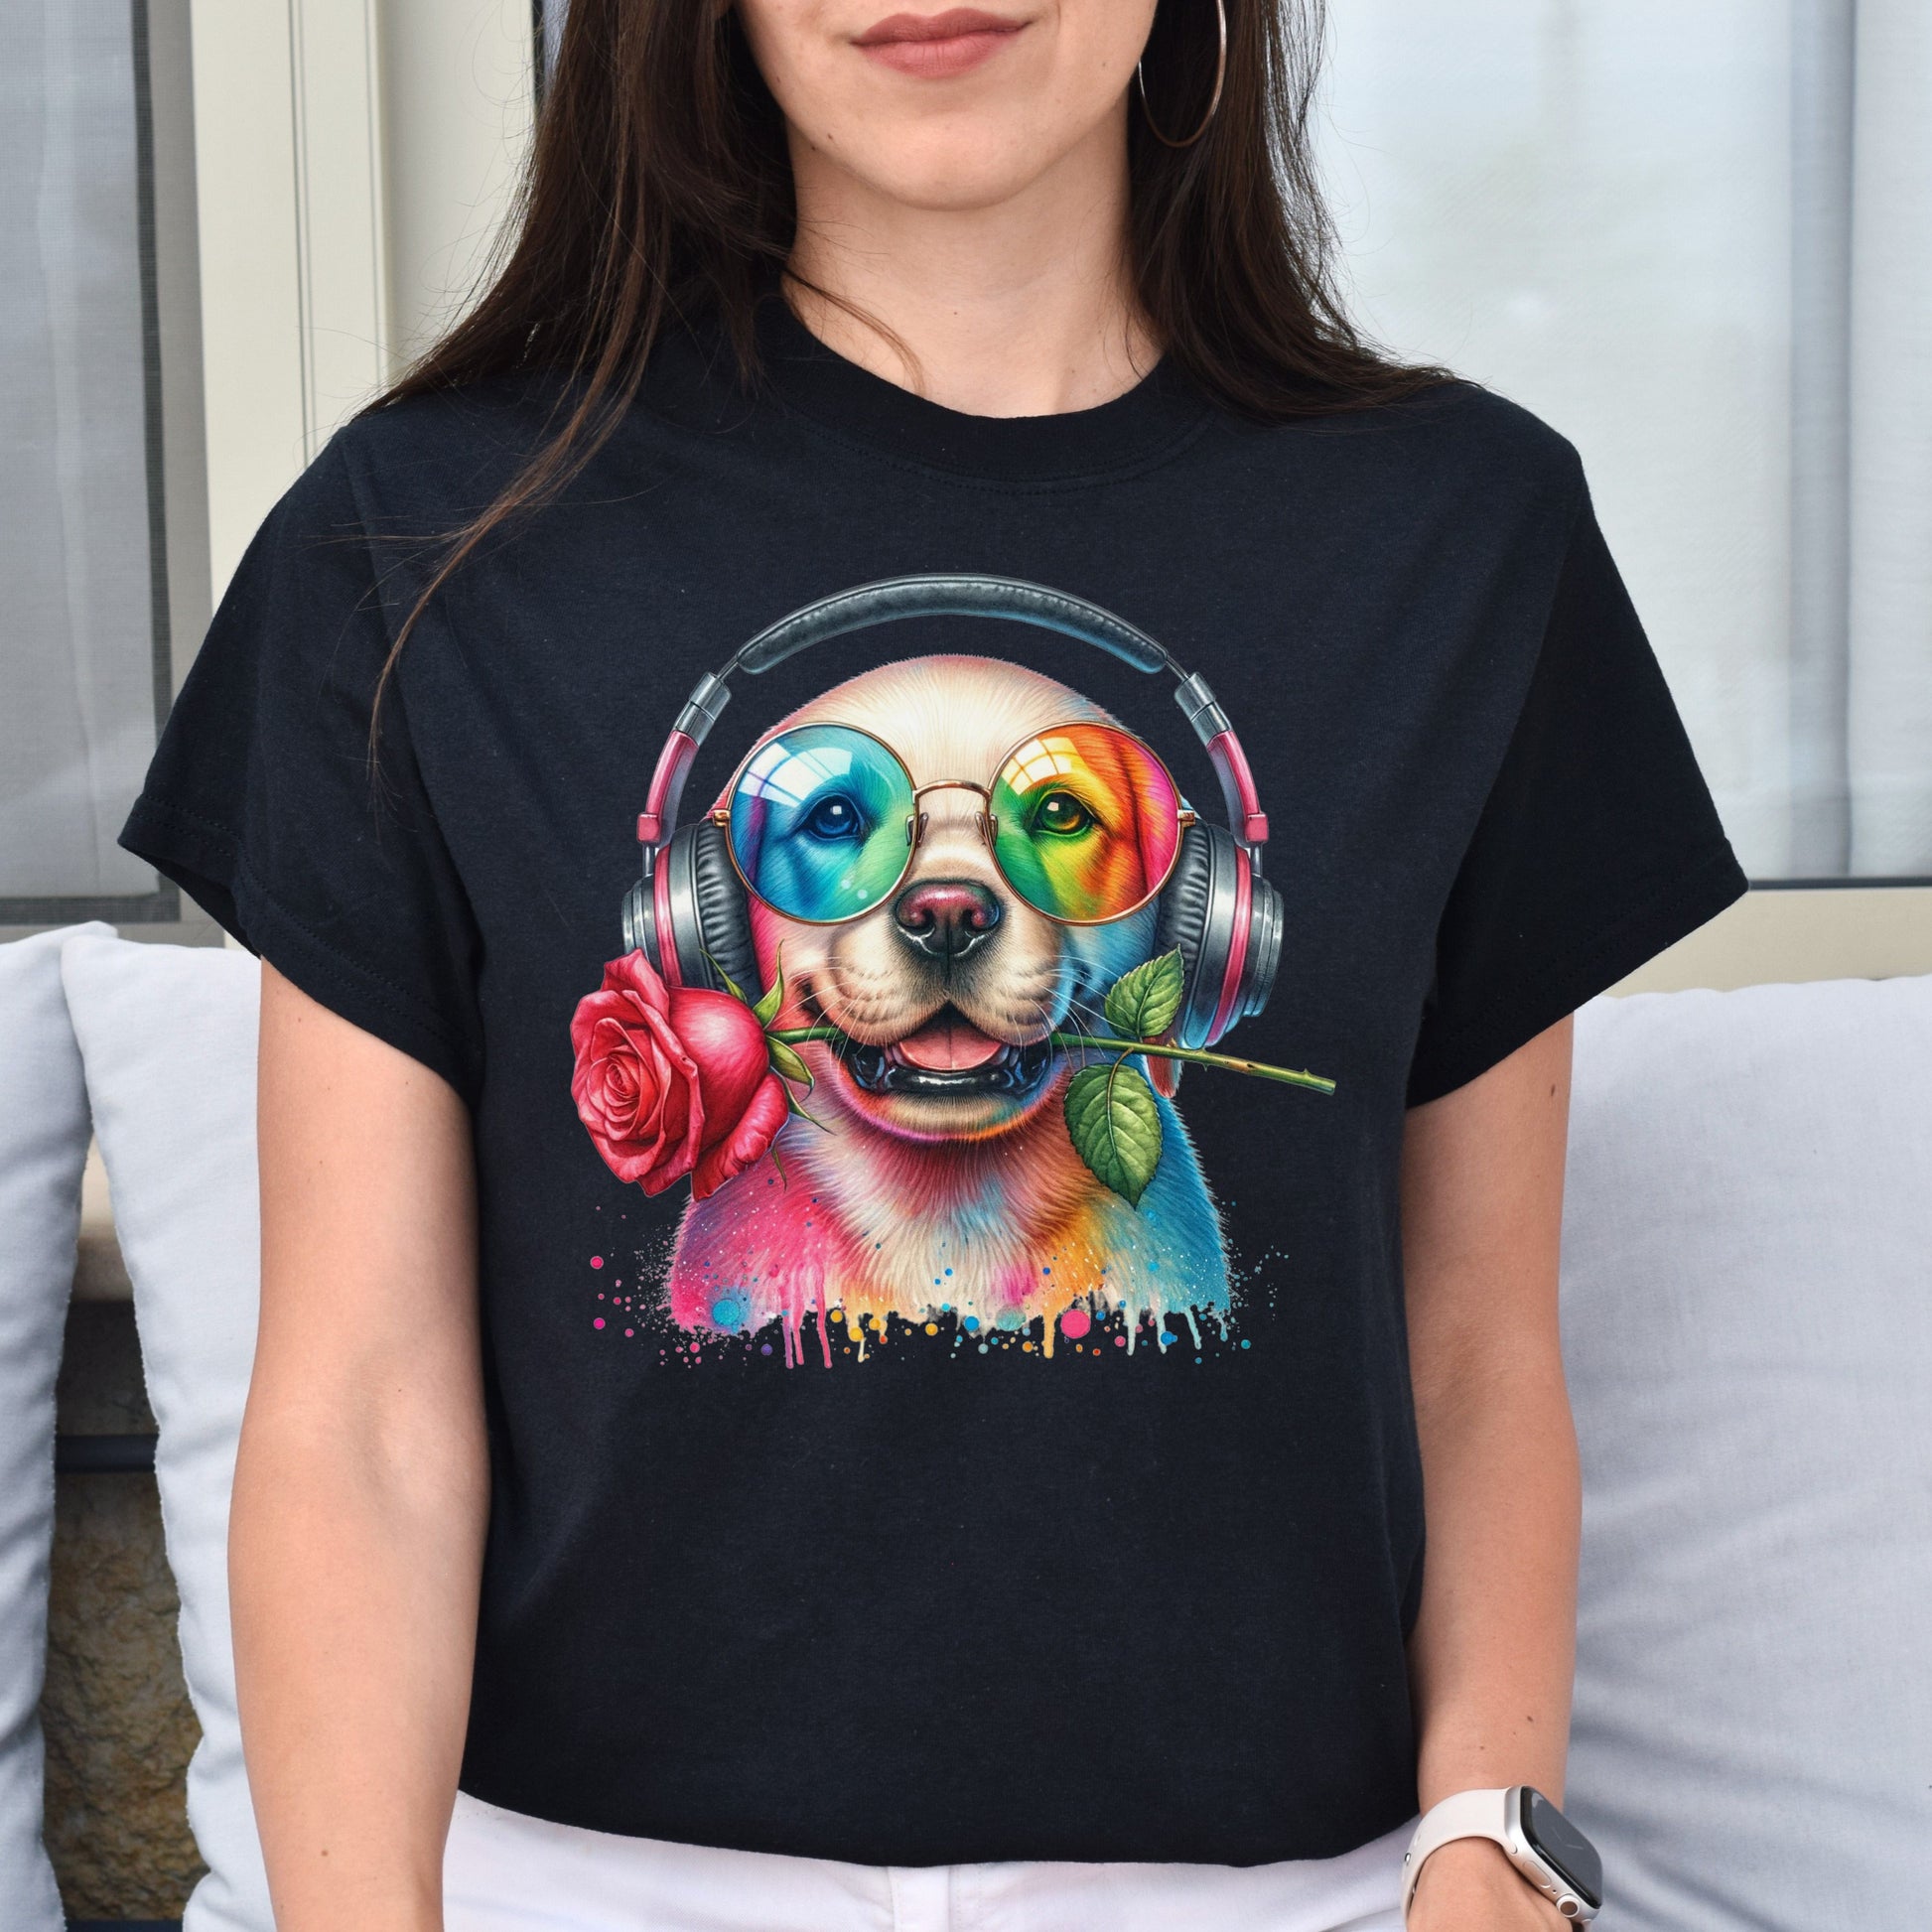 Labrador with Rose Colorful Unisex T-Shirt Cool romantic dog tee Black Navy Dark Heather-Family-Gift-Planet